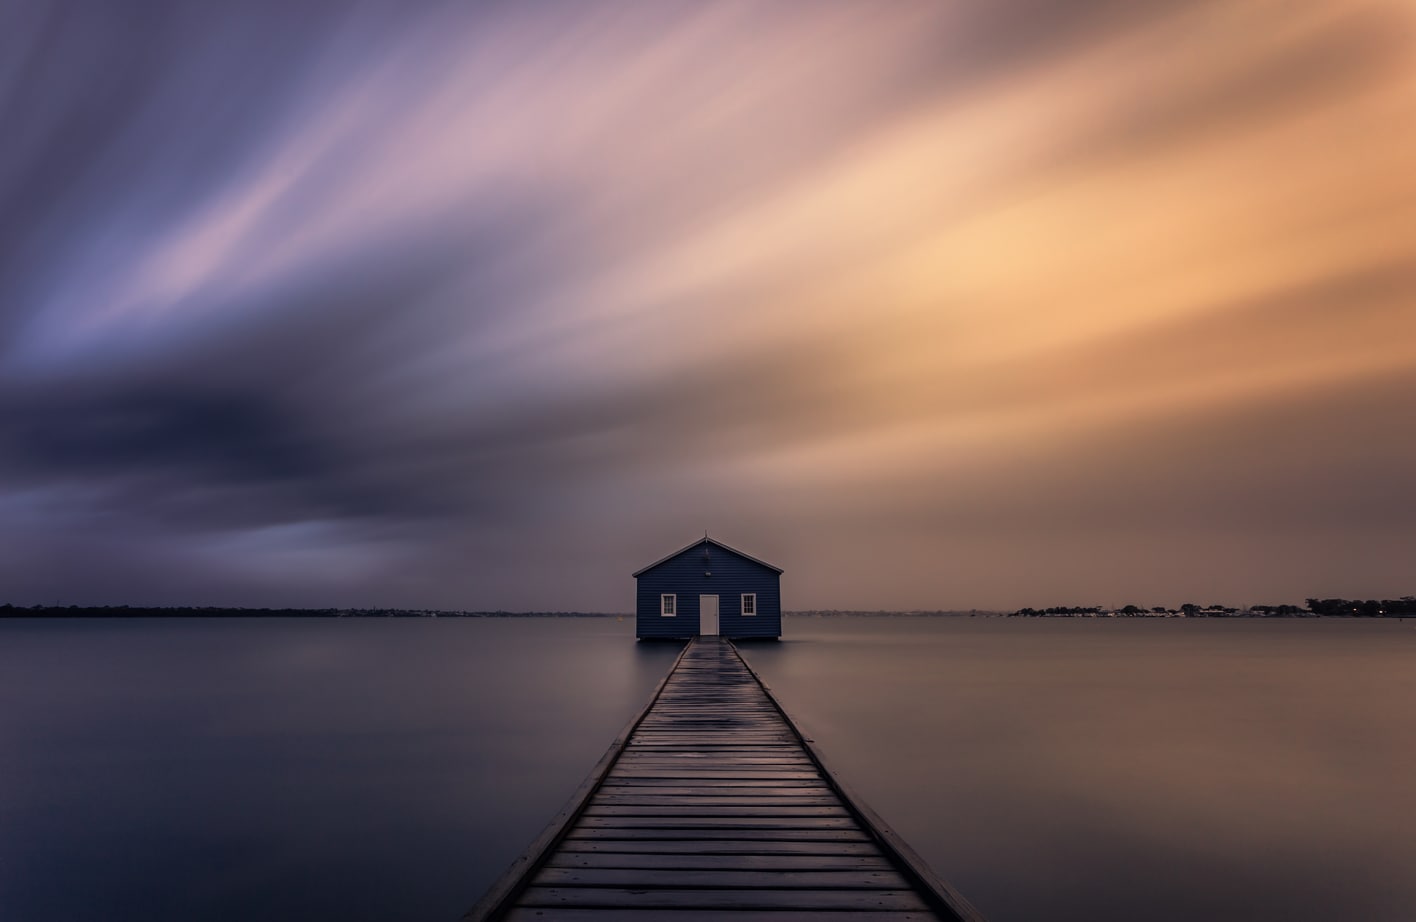 Long exposure photography tours